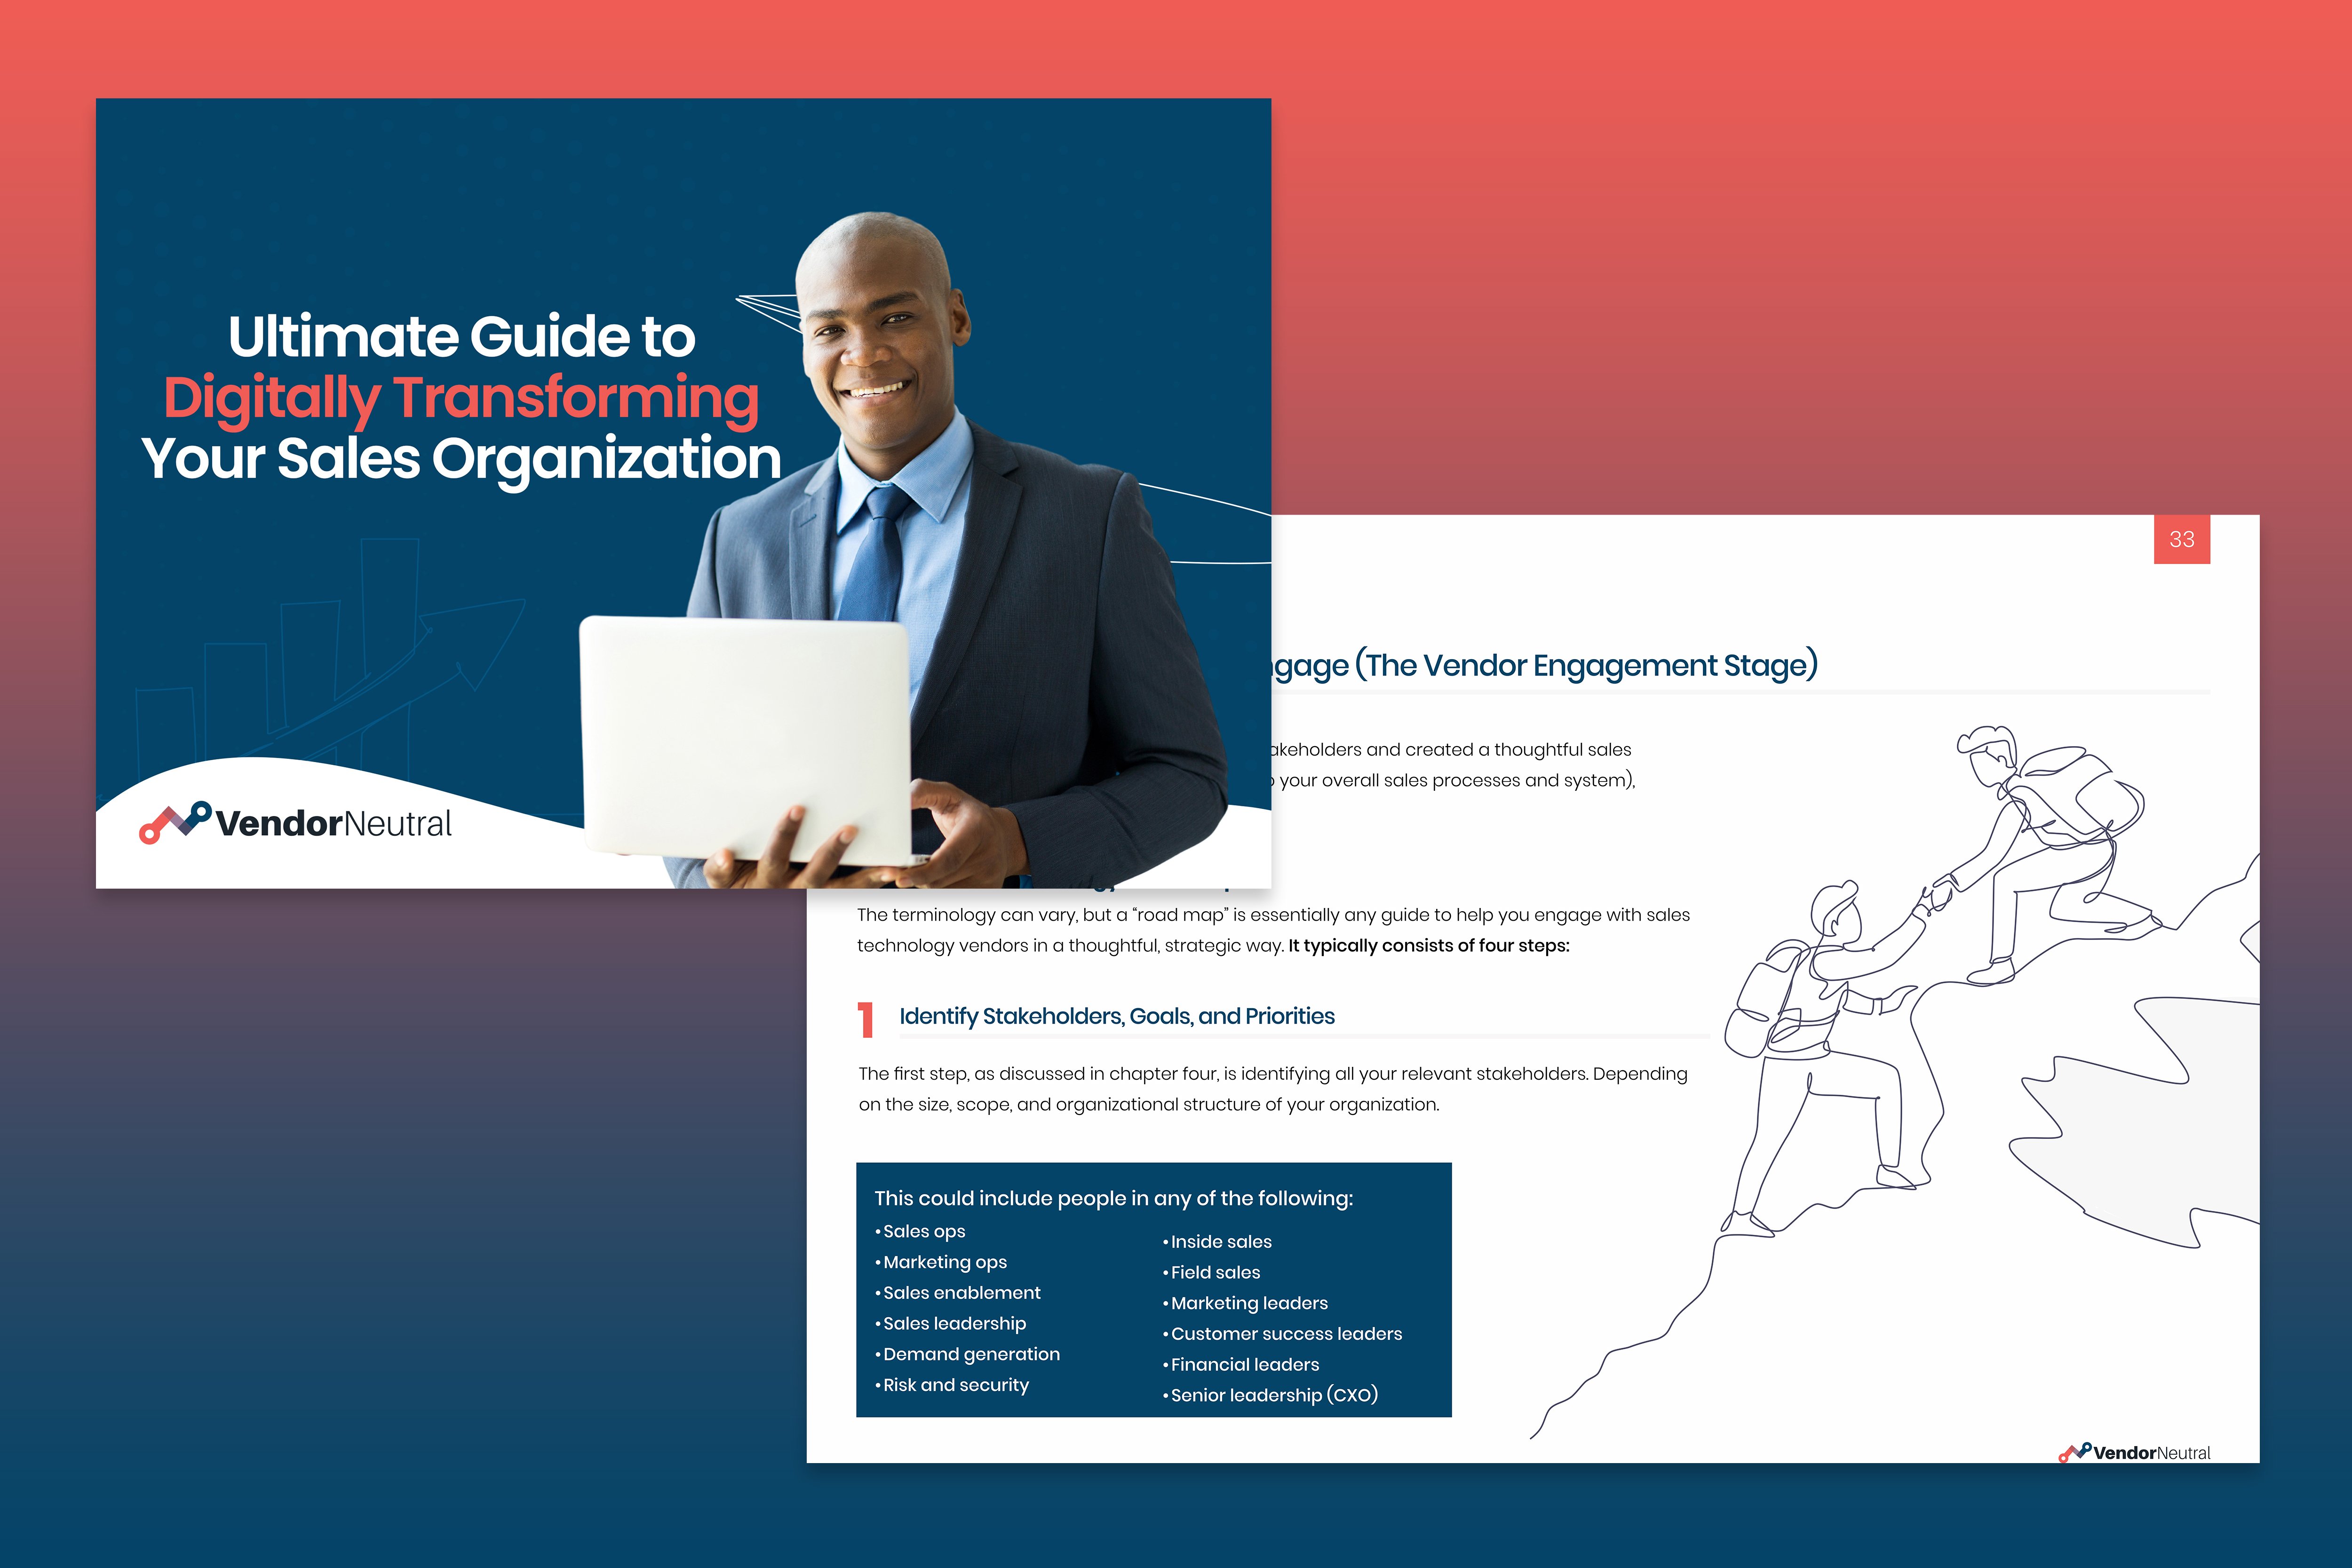 Ultimate Guide To Digitally Transforming Your Sales Organization Cover & Page Image 